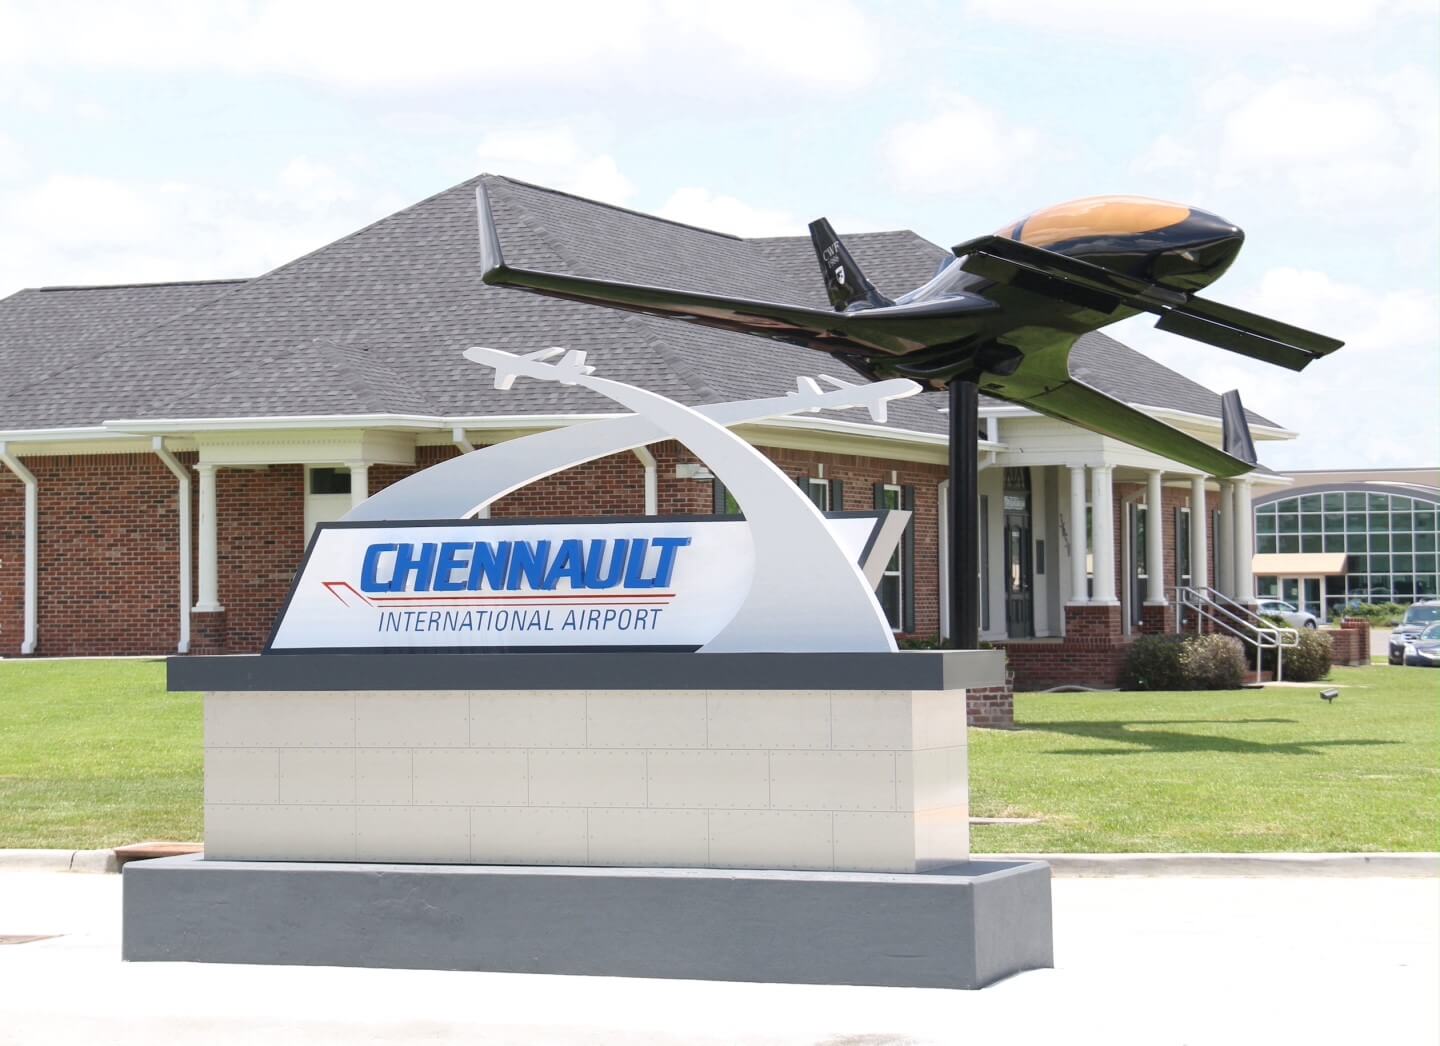 Chennault International Airport and Park in Lake Charles, Louisiana